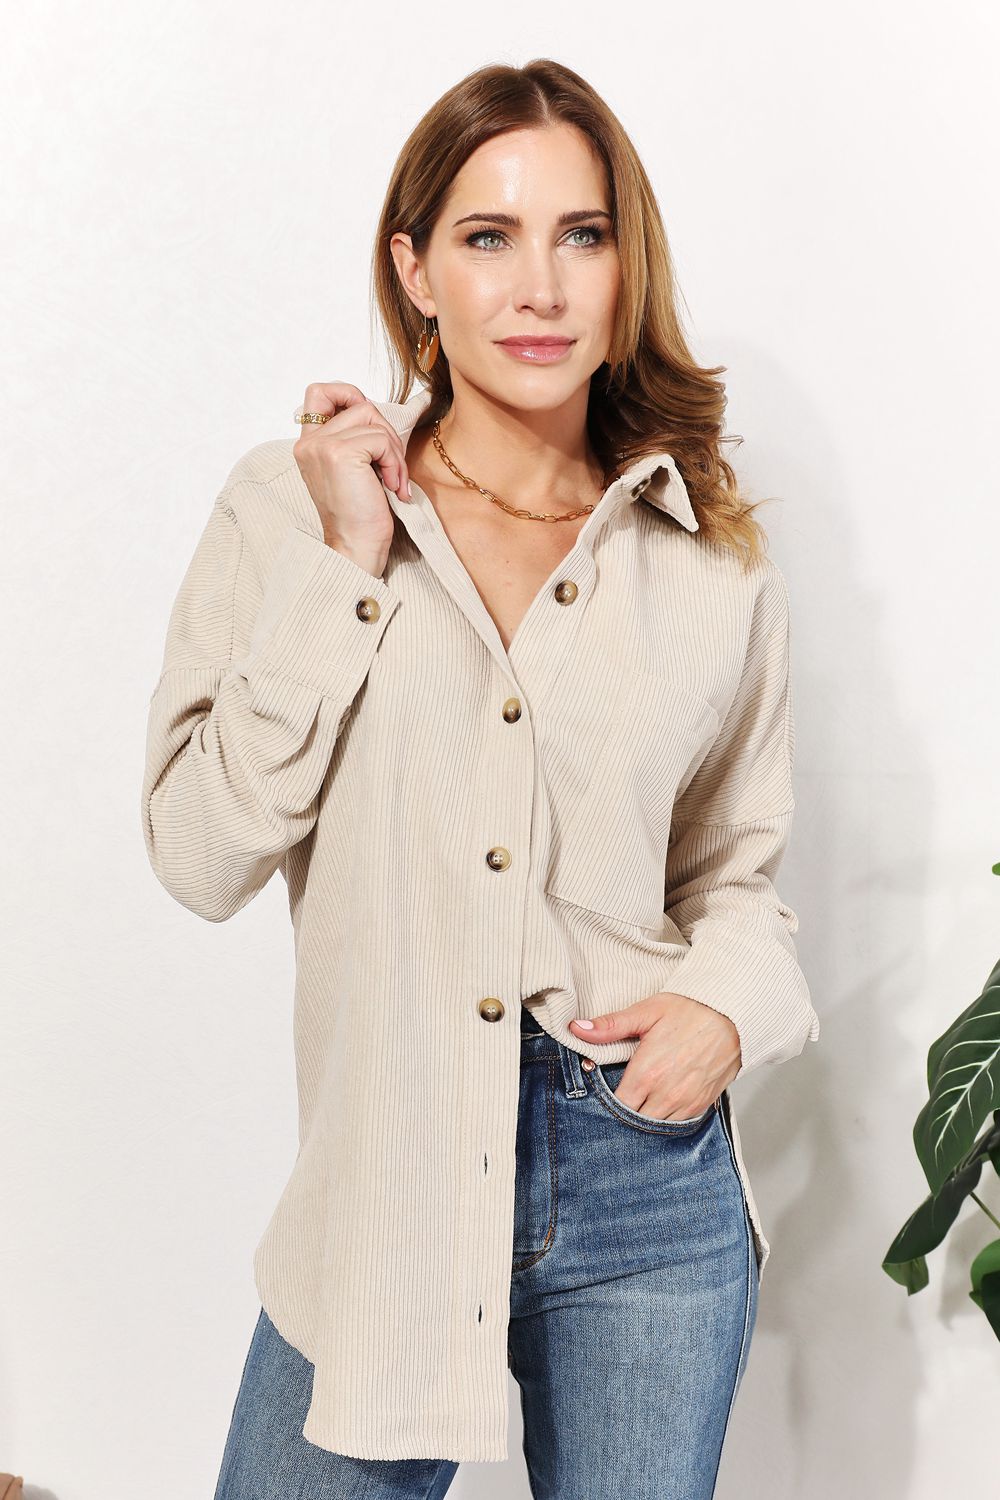 Chic Comfort: Oversized Tunic with Bust Pocket